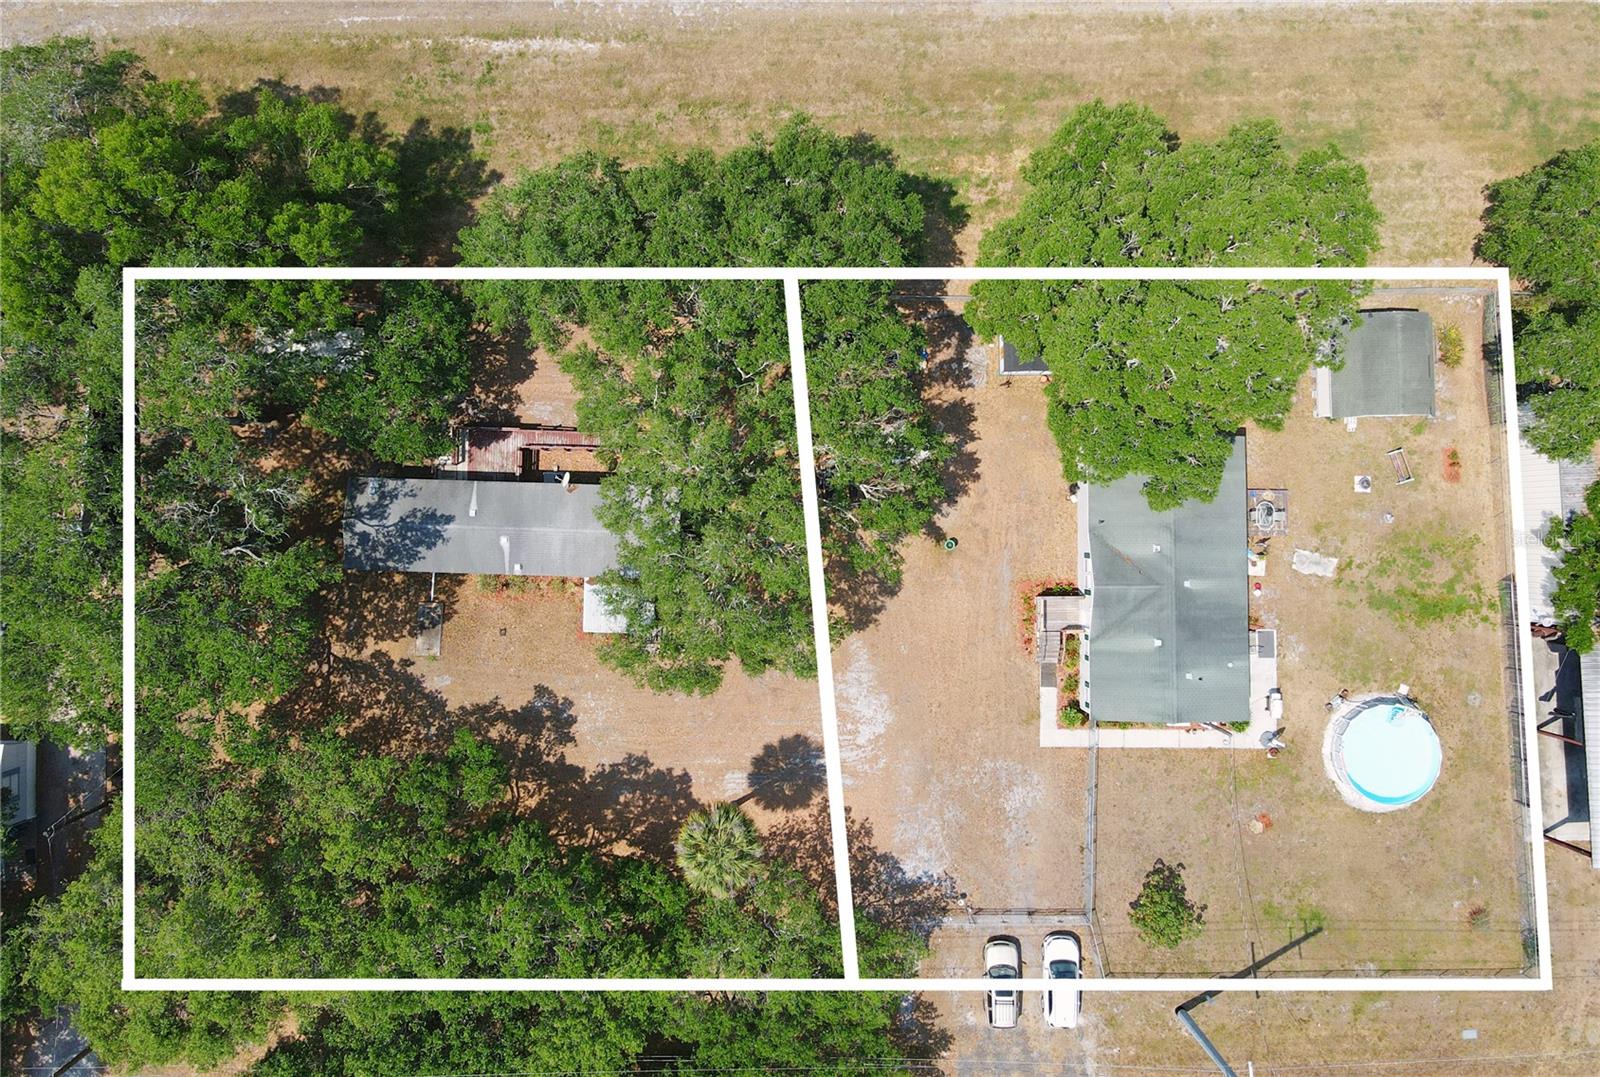 Approx. lot sizes of 11209 and 11217 lots Inglewood Dr. Side by side, ideal for a family compound or home-office combo. Live in one unit and rent the other. The possibilities are endless!